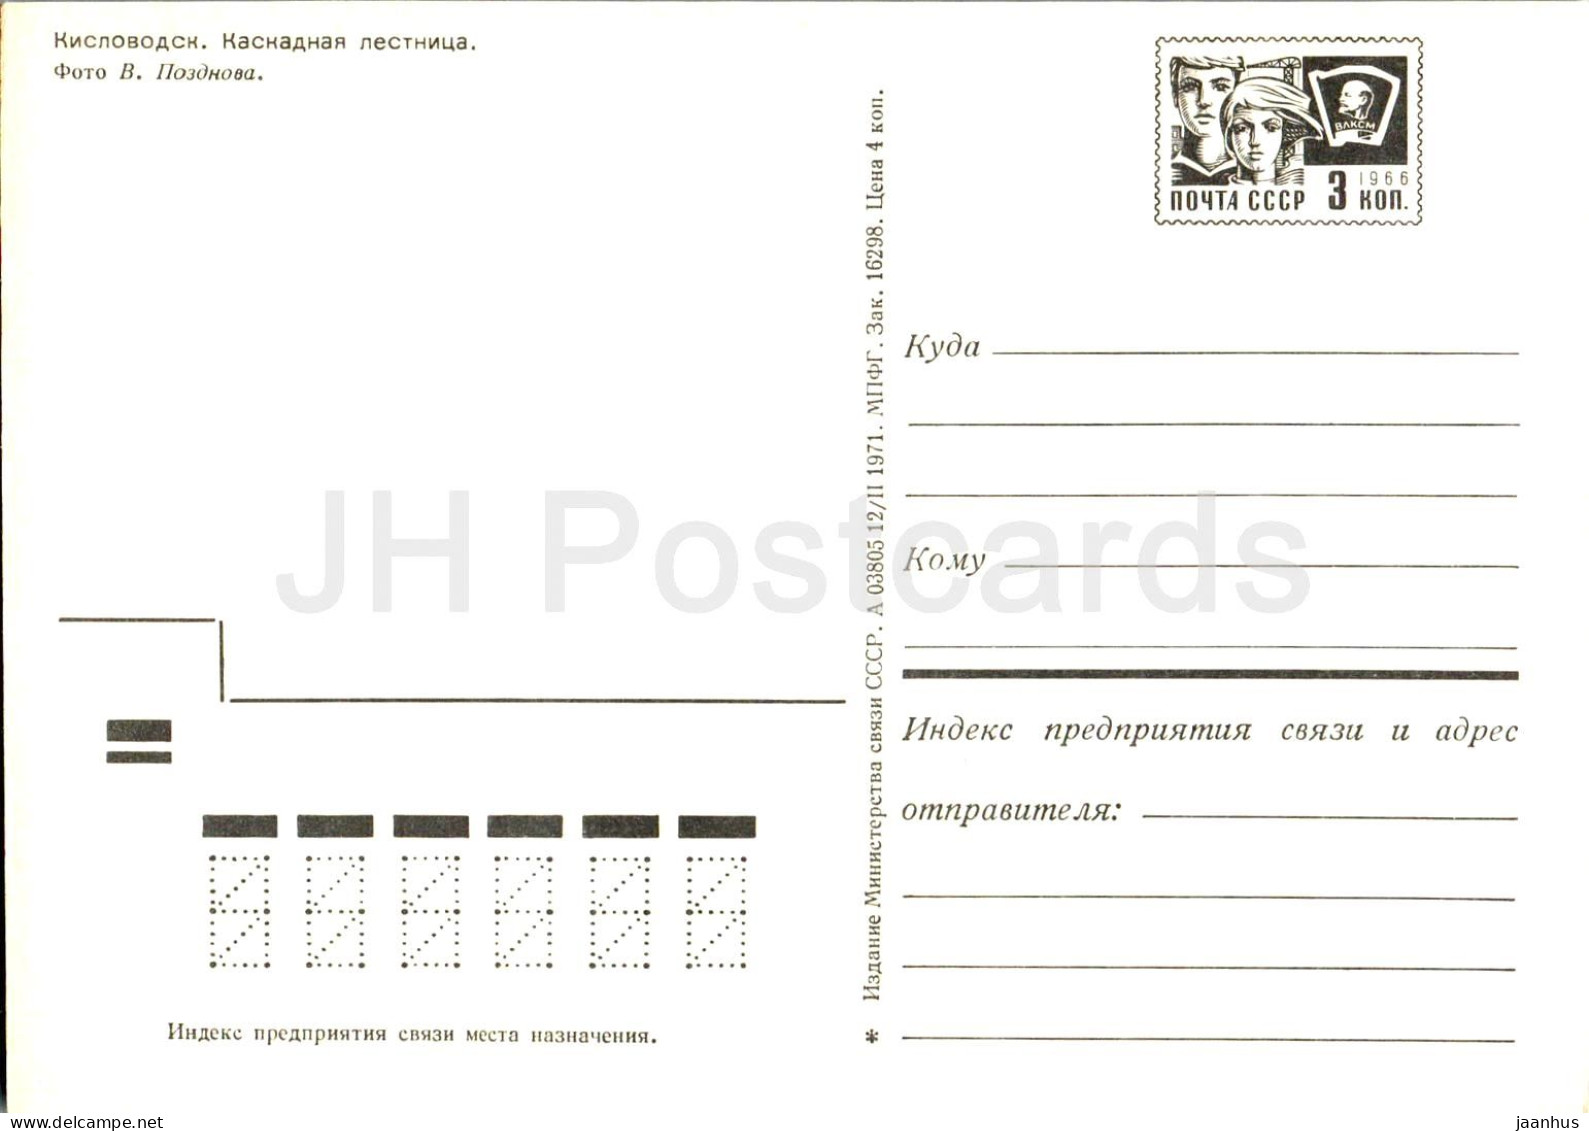 Kislovodsk - Cascading Staircase - Postal Stationery - 1971 - Russia USSR - Unused - Russie